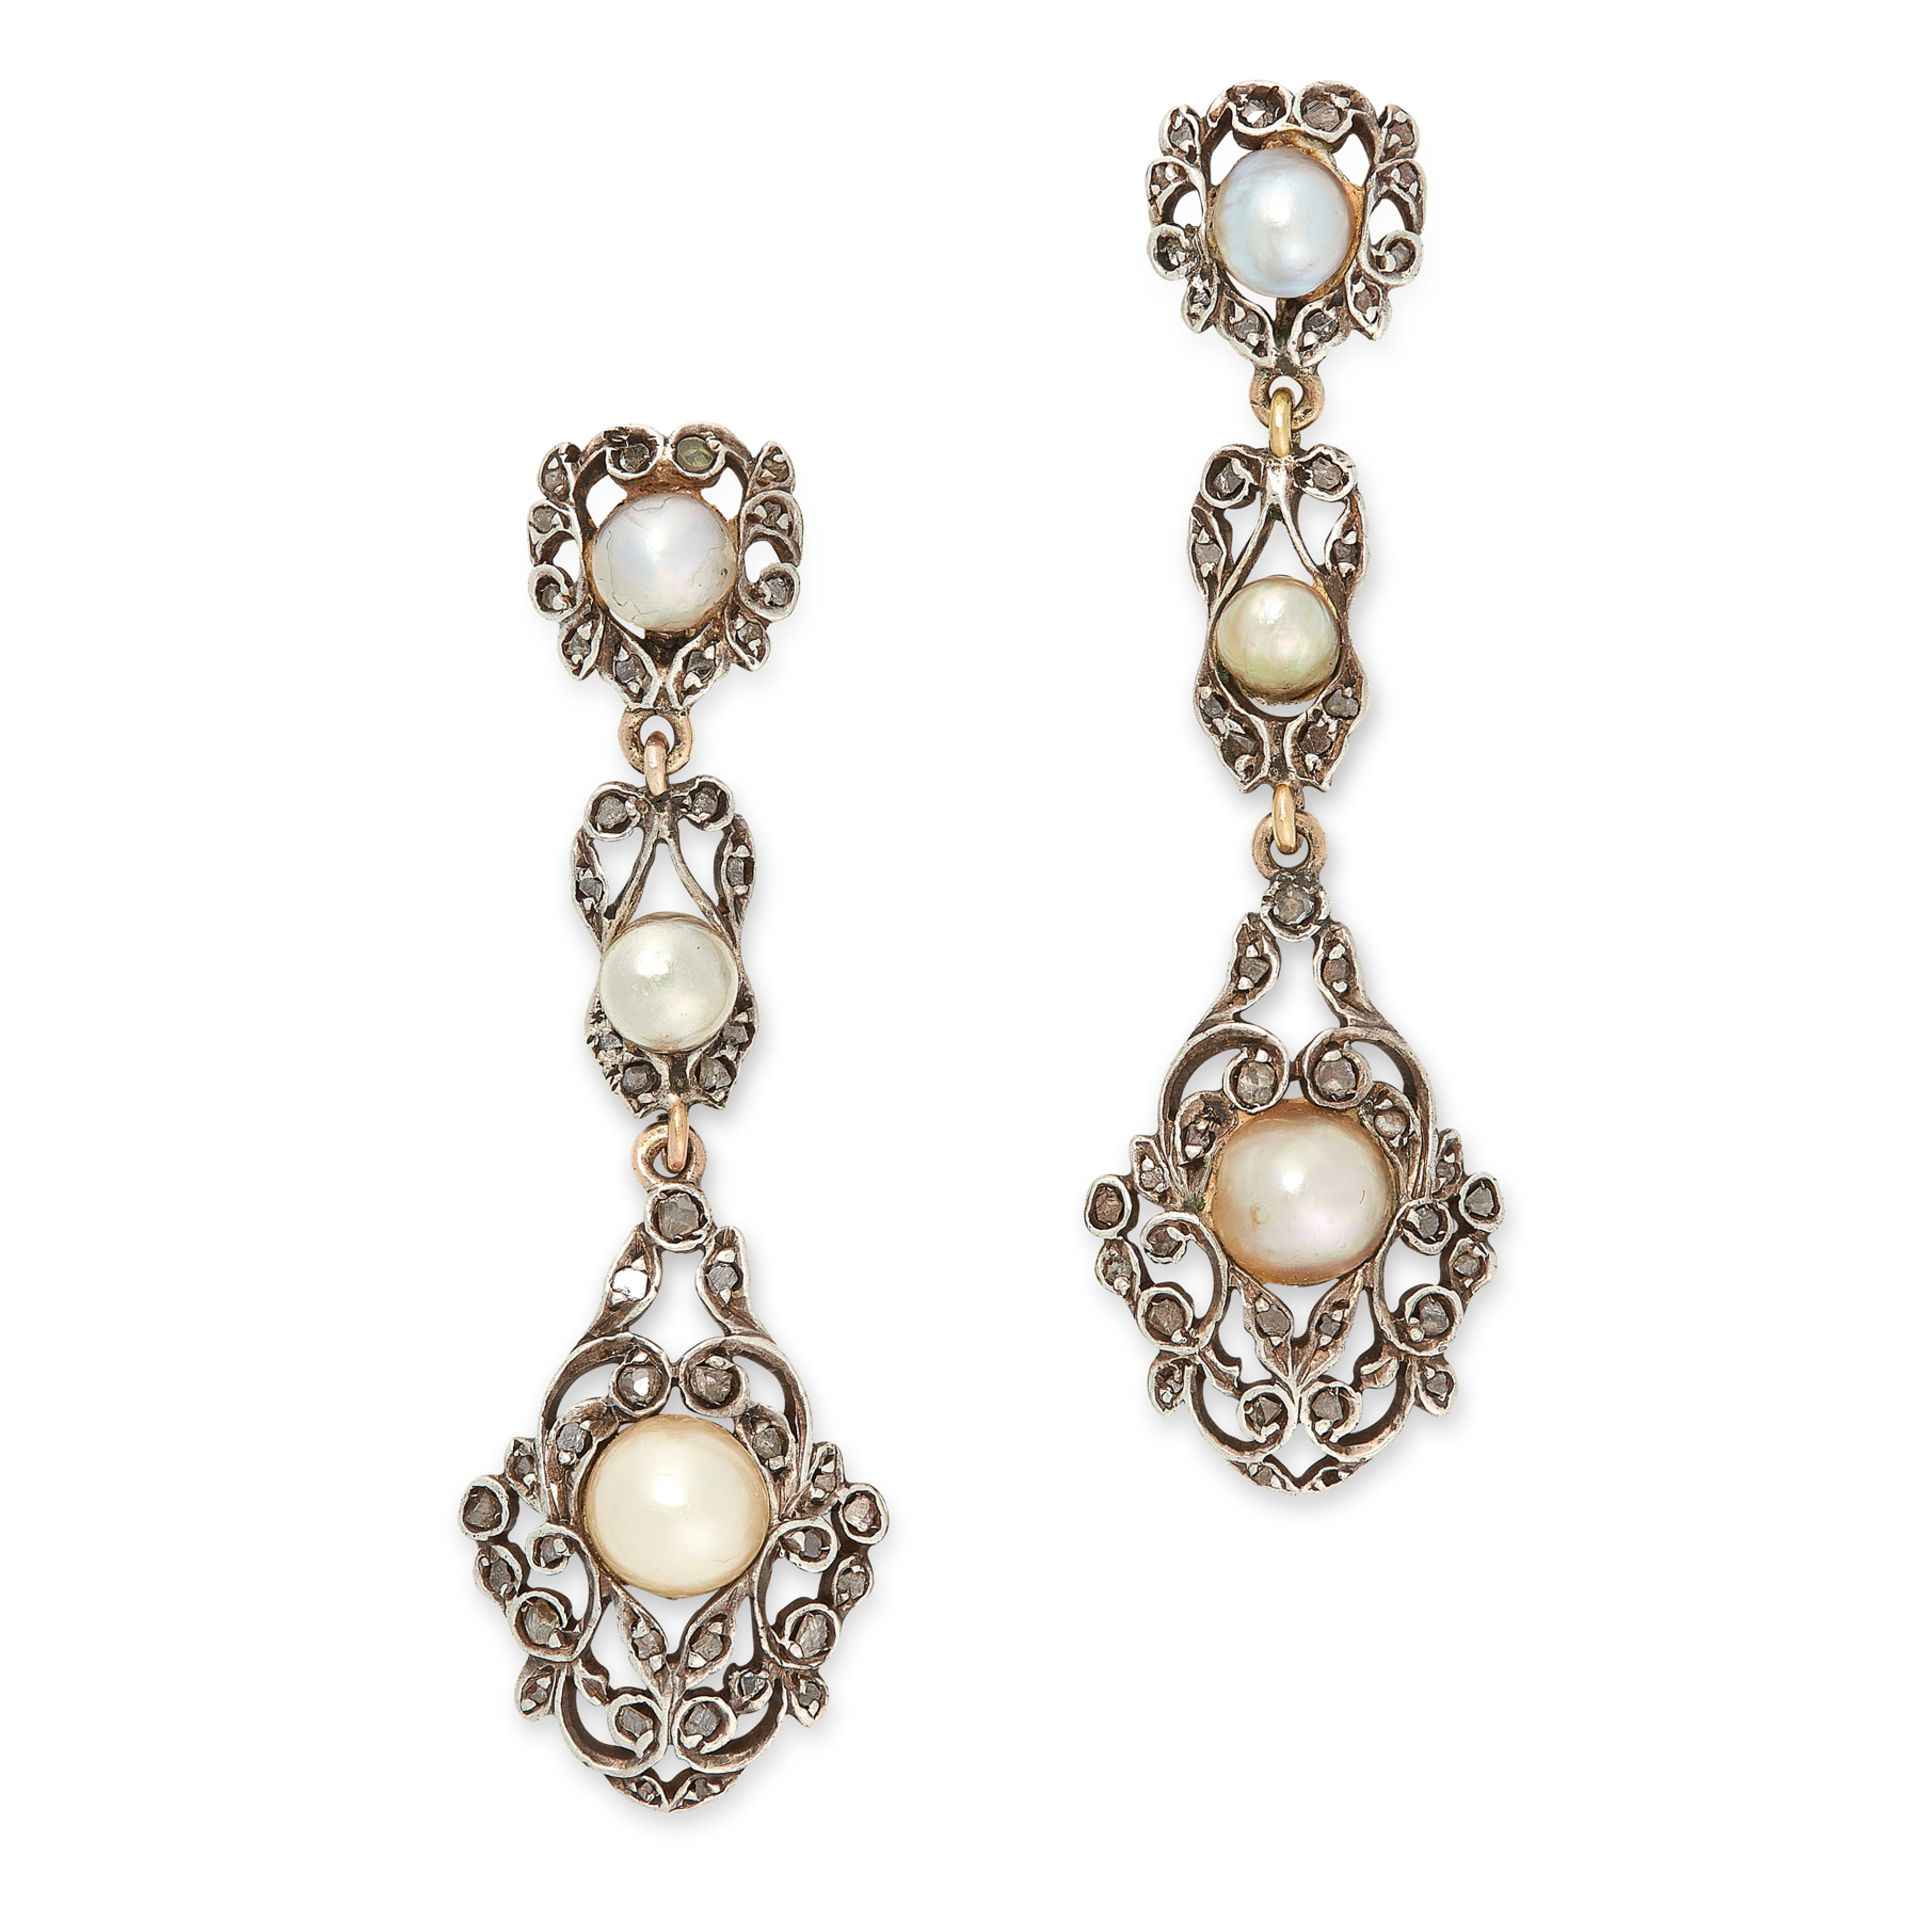 A PAIR OF ANTIQUE PEARL AND DIAMOND EARRINGS in yellow gold and silver, the articulated bodies